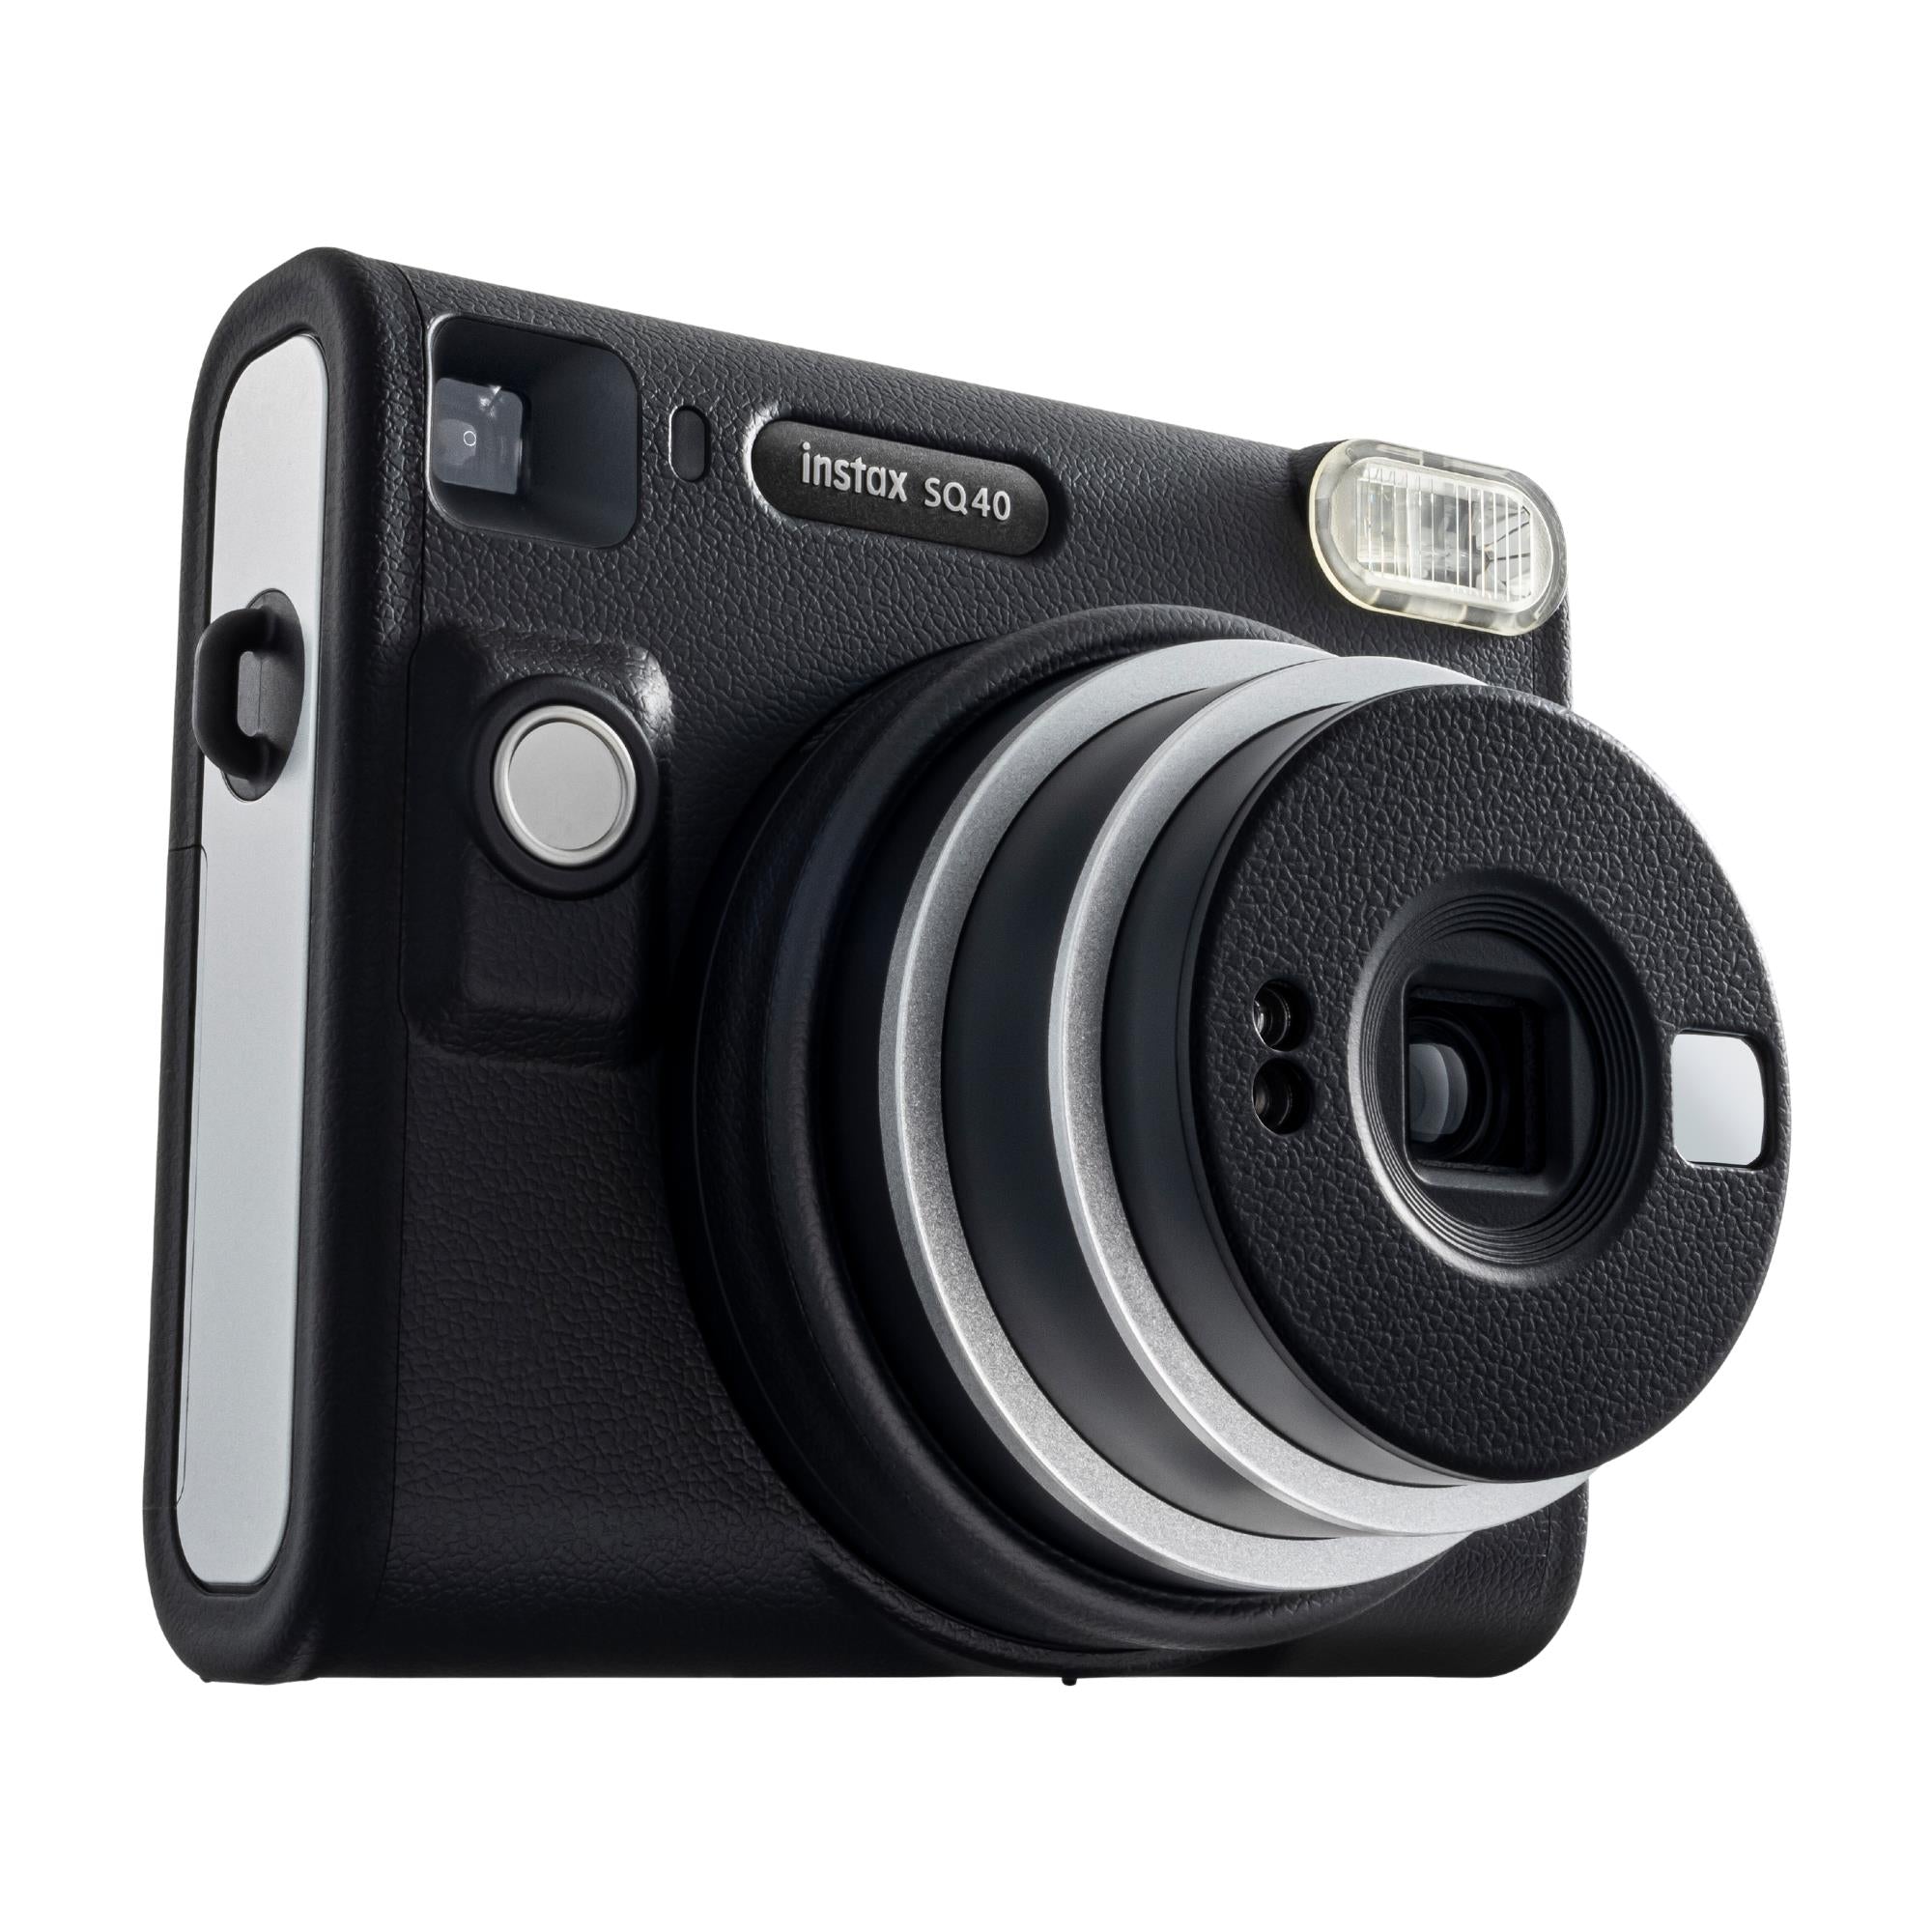 Fujifilm is Developing a Square Format Instax Camera and Instant